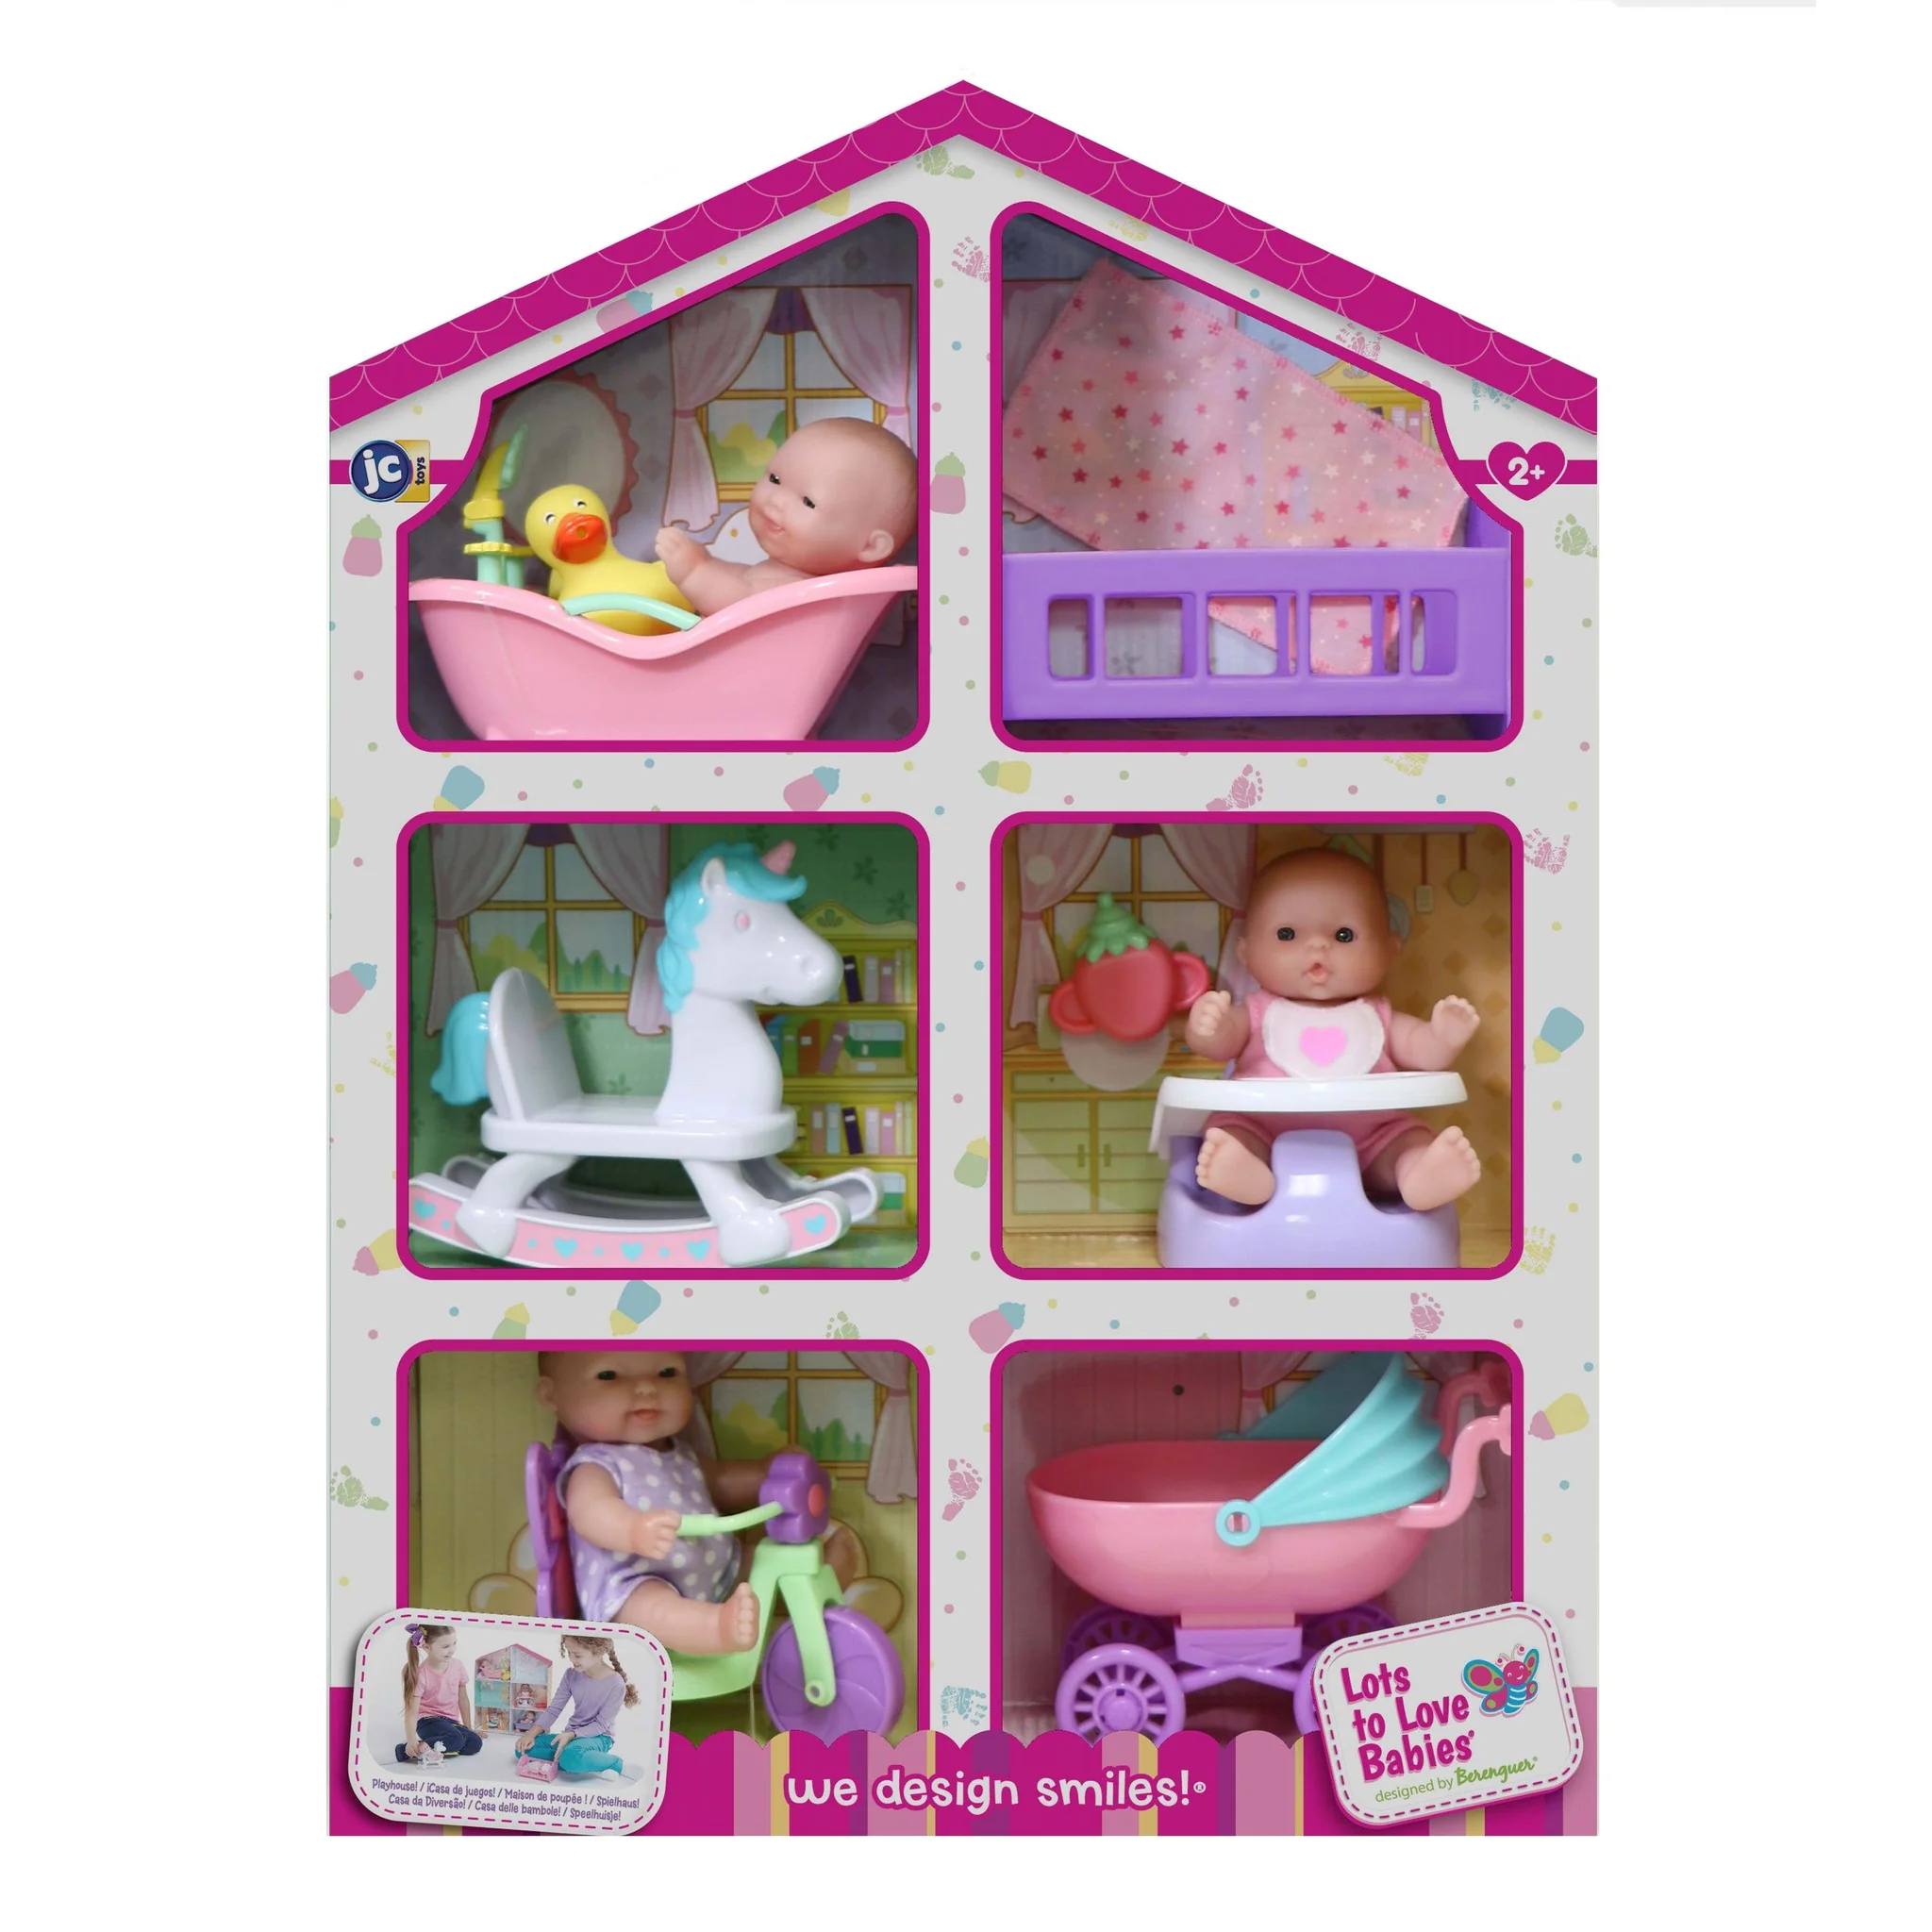 LOTS TO LOVE BABIES 5" MINI DOLL HOUSE